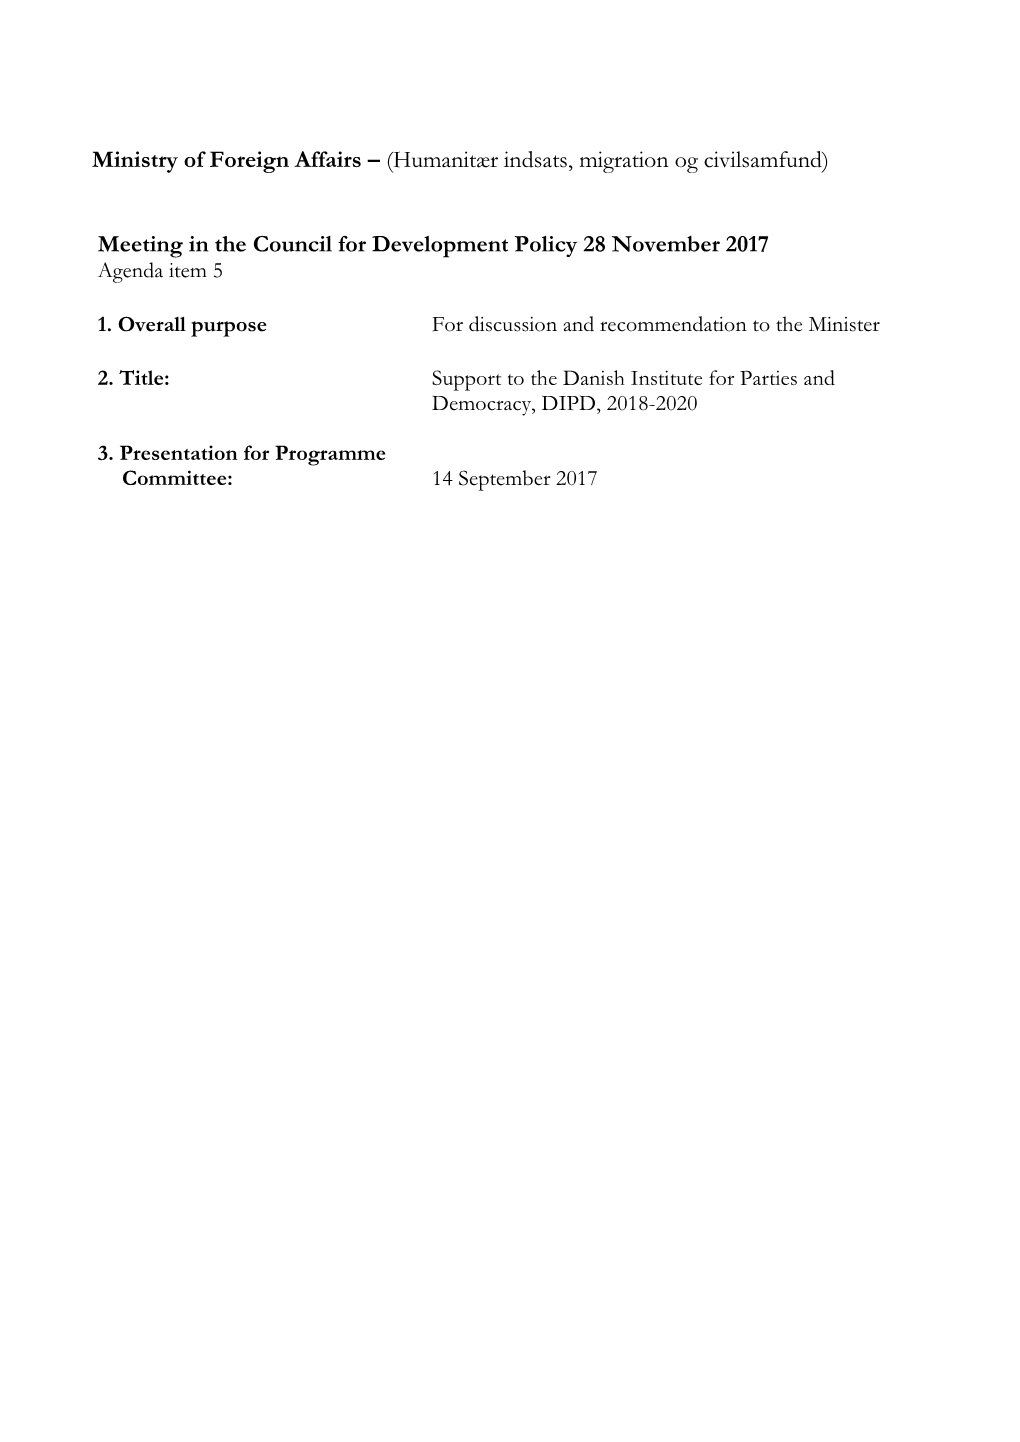 Meeting in the Council for Development Policy 28 November 2017 Agenda Item 5